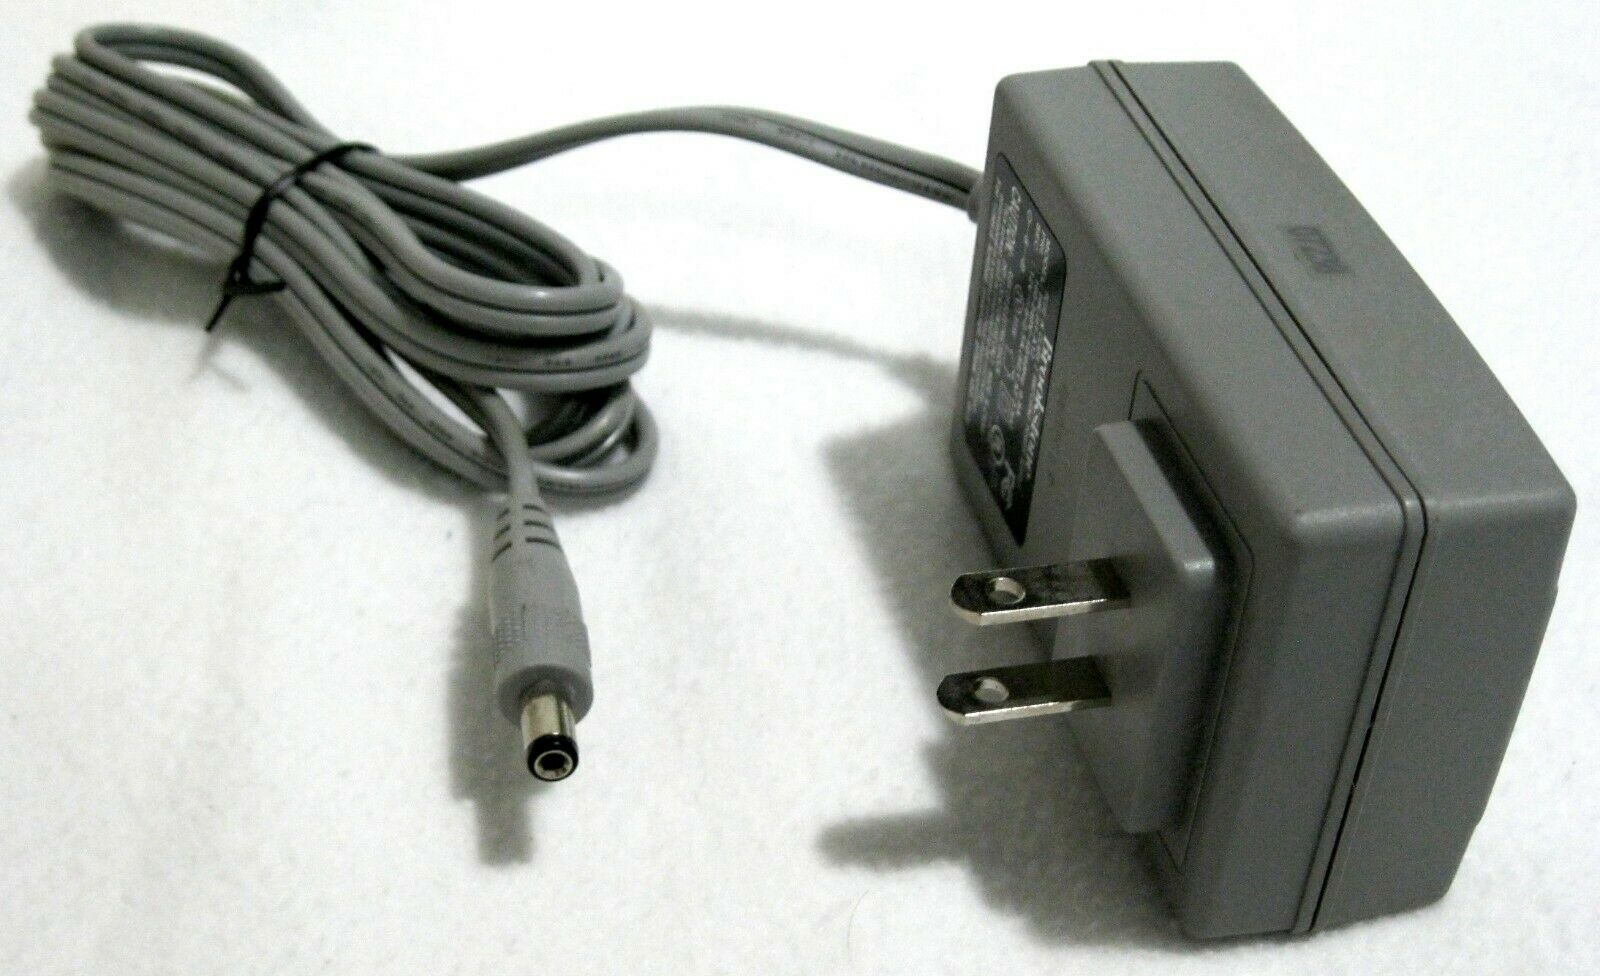 NEW Brookstone HK-H1-A12 Power Supply AC DC Adapter 12V 0-2.5A